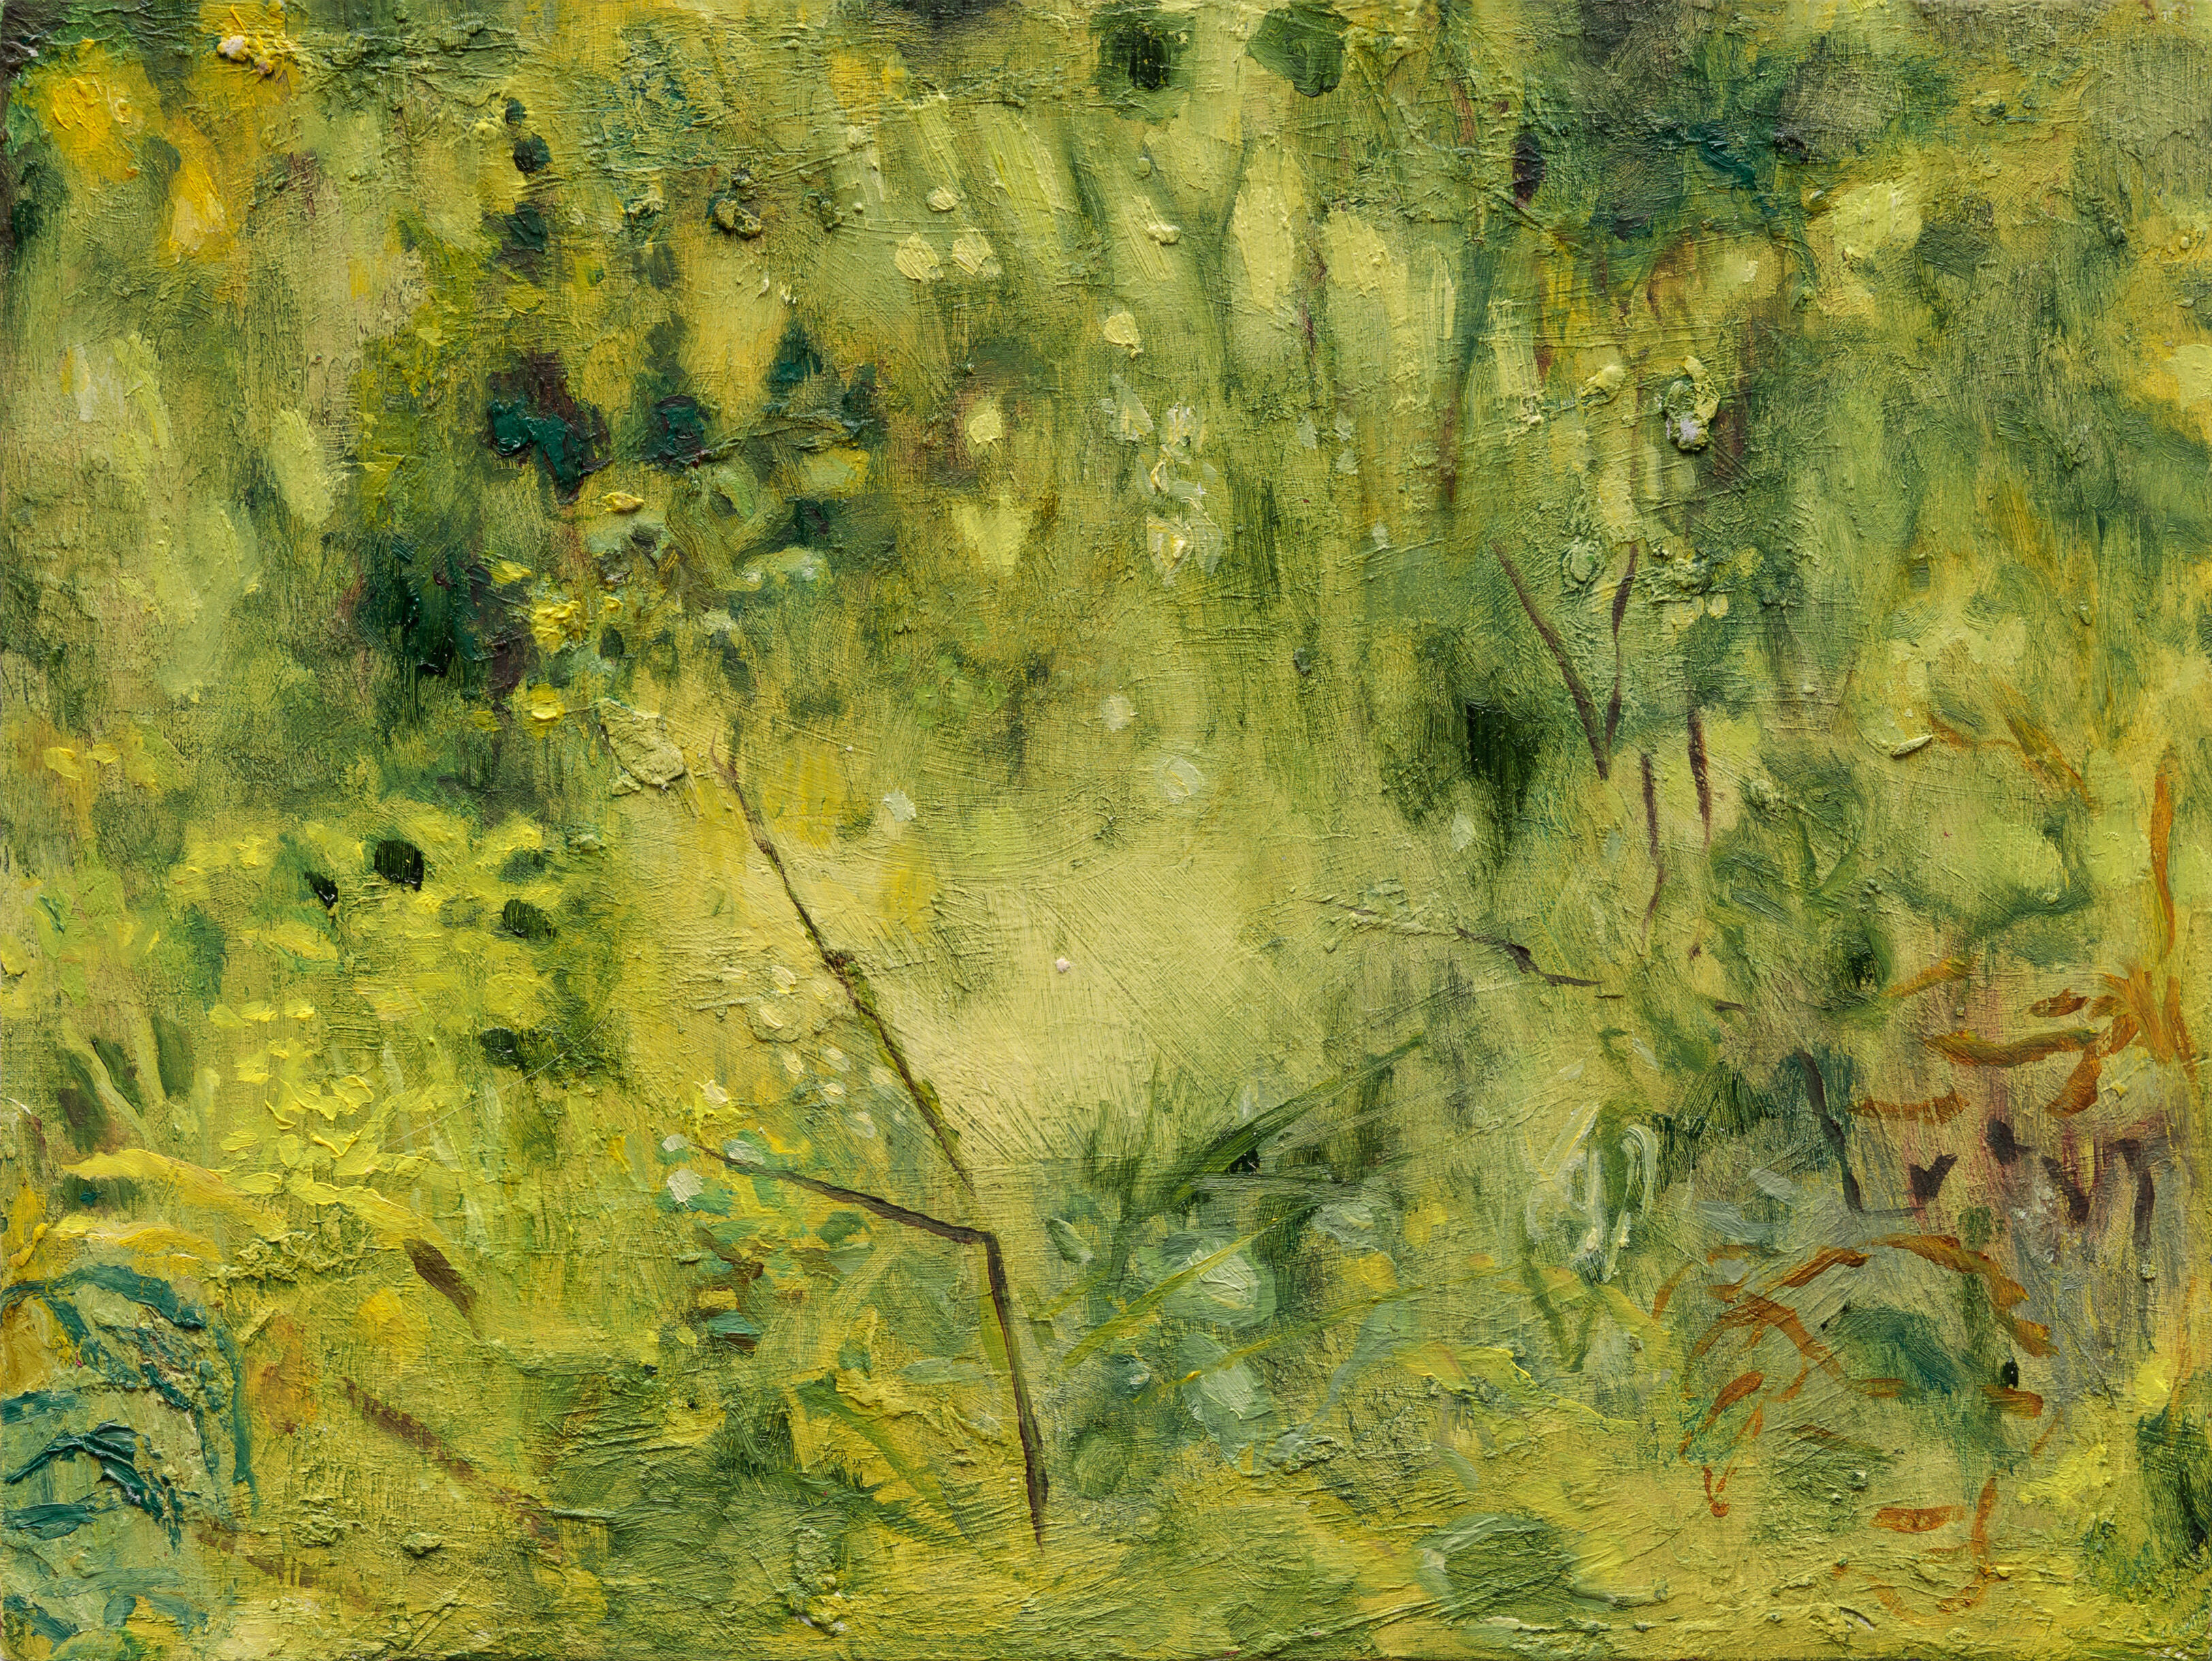 An abstract painting of a verdant landscape by Meris Drew